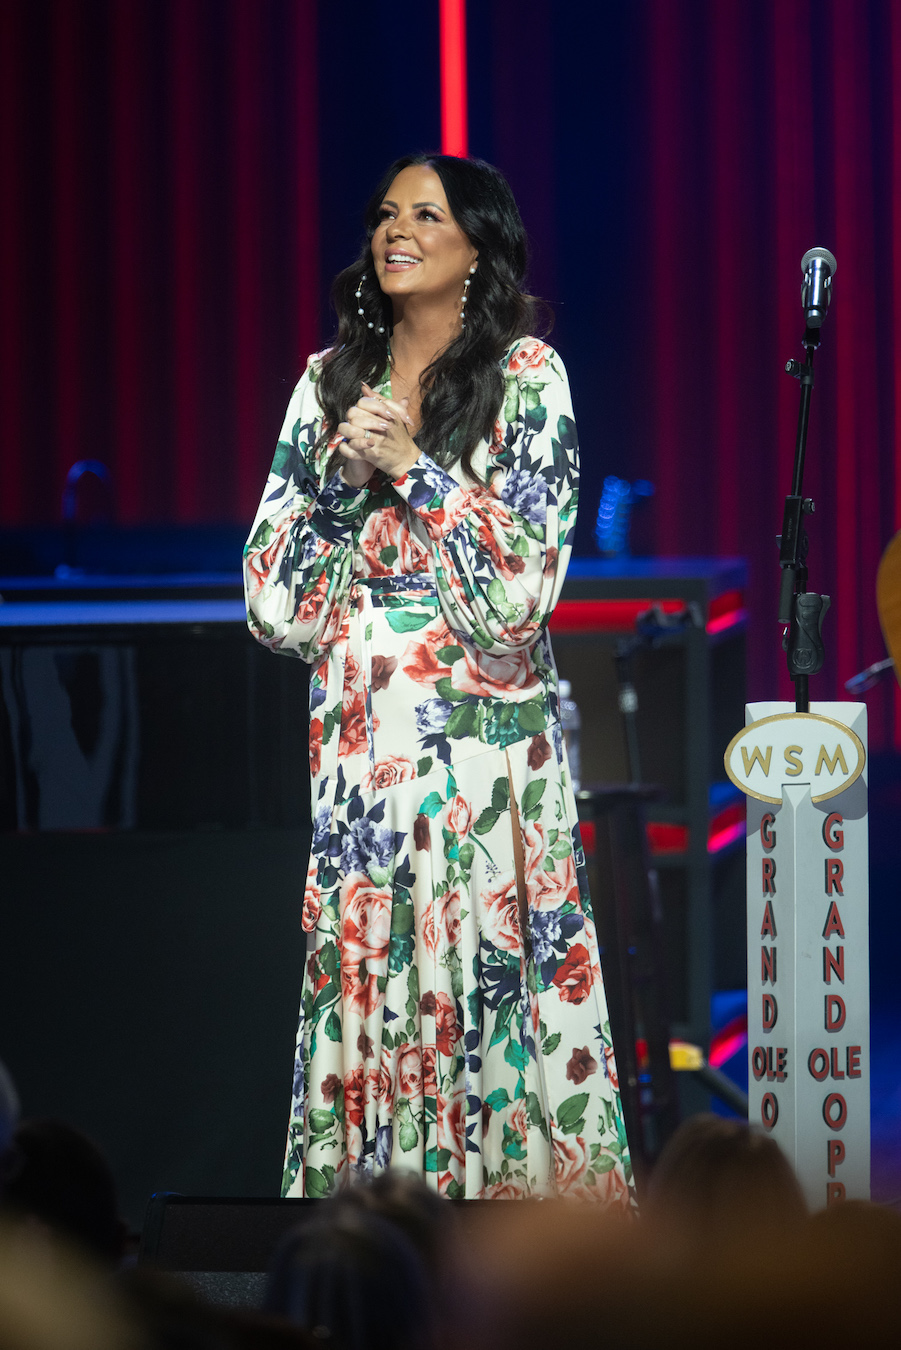 Opry member Sara Evans (Photo by Chris Hollo// provided by Schmidt Relations)